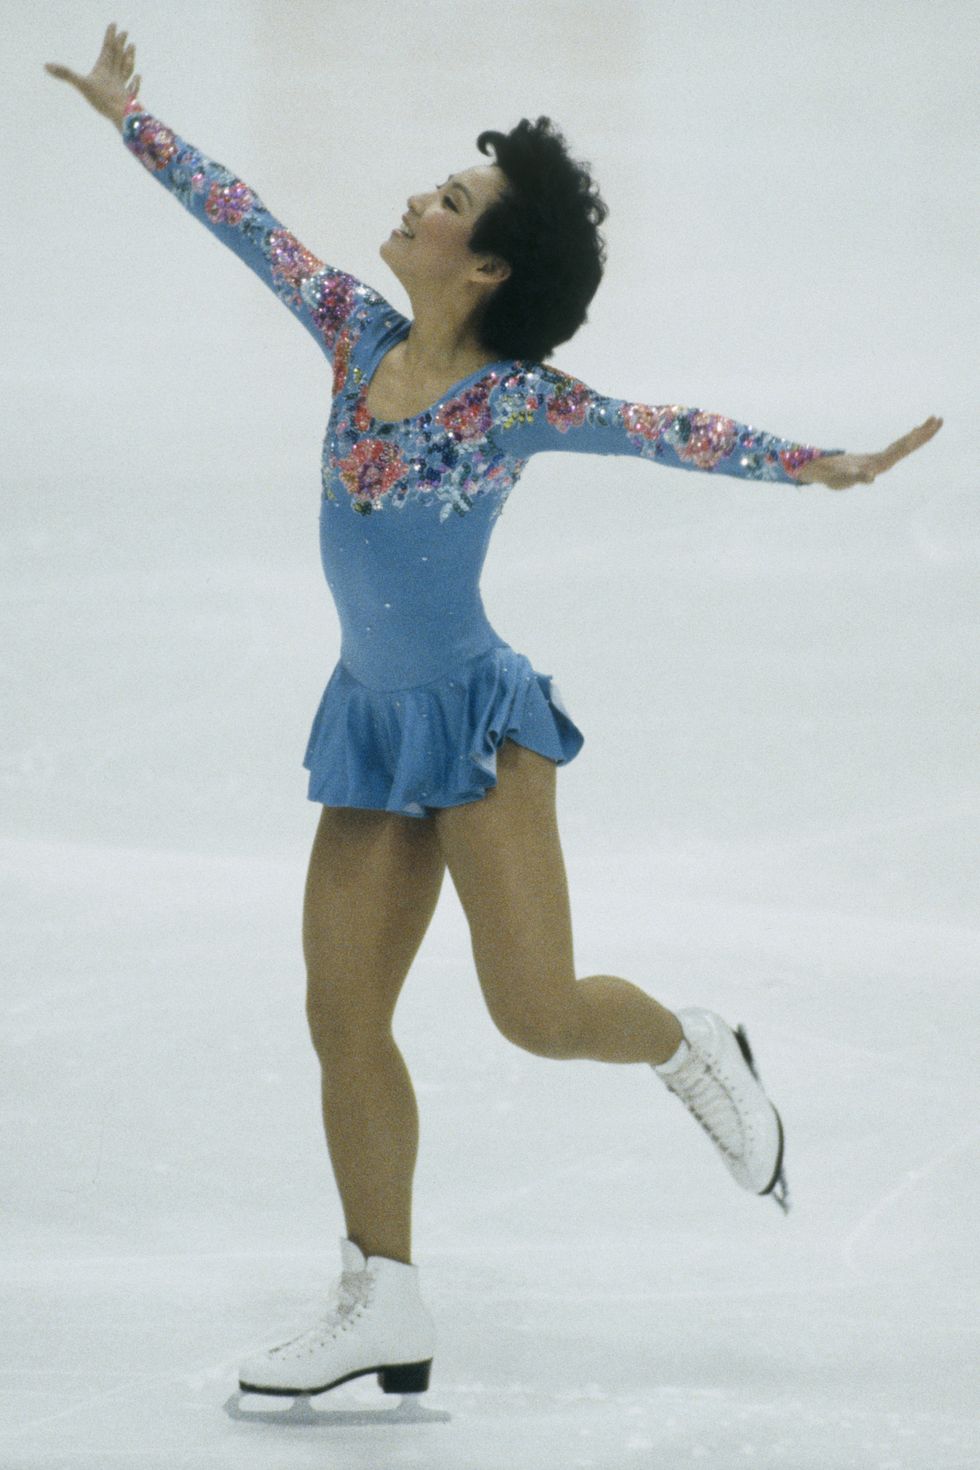 Photos: Most Daring Figure-Skating Outfits, Dresses of All Time